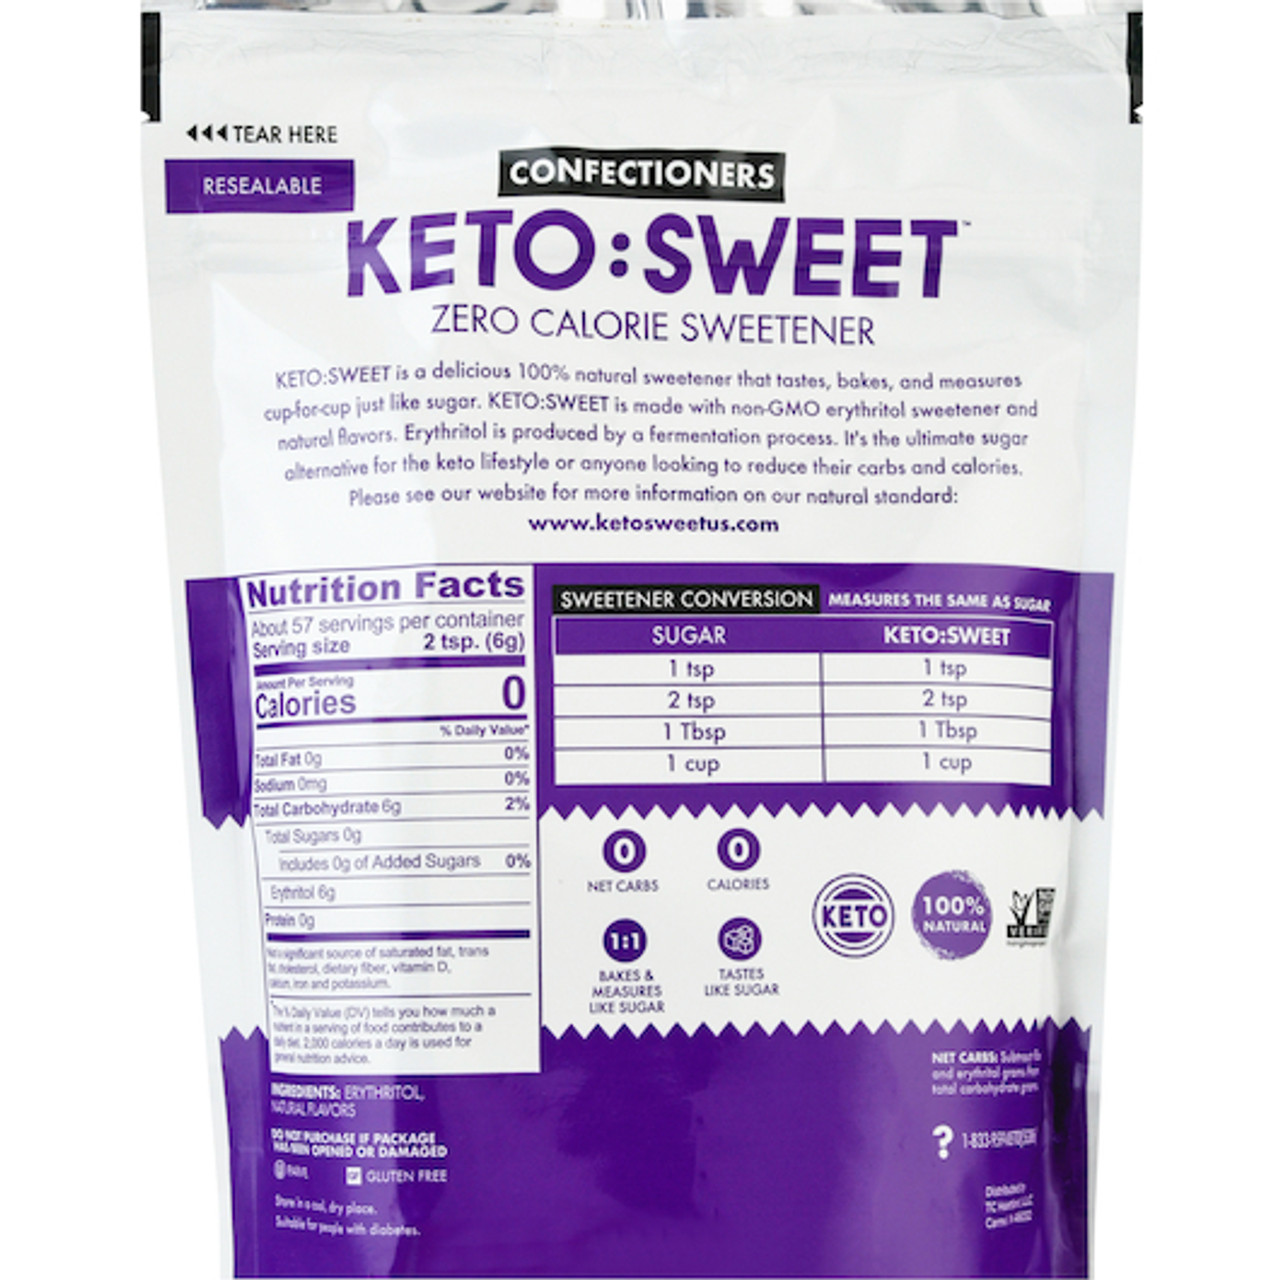 Keto:Sweet Confectioners The Ultimate Sugar Alternative, 12 Oz (Pack of 6)